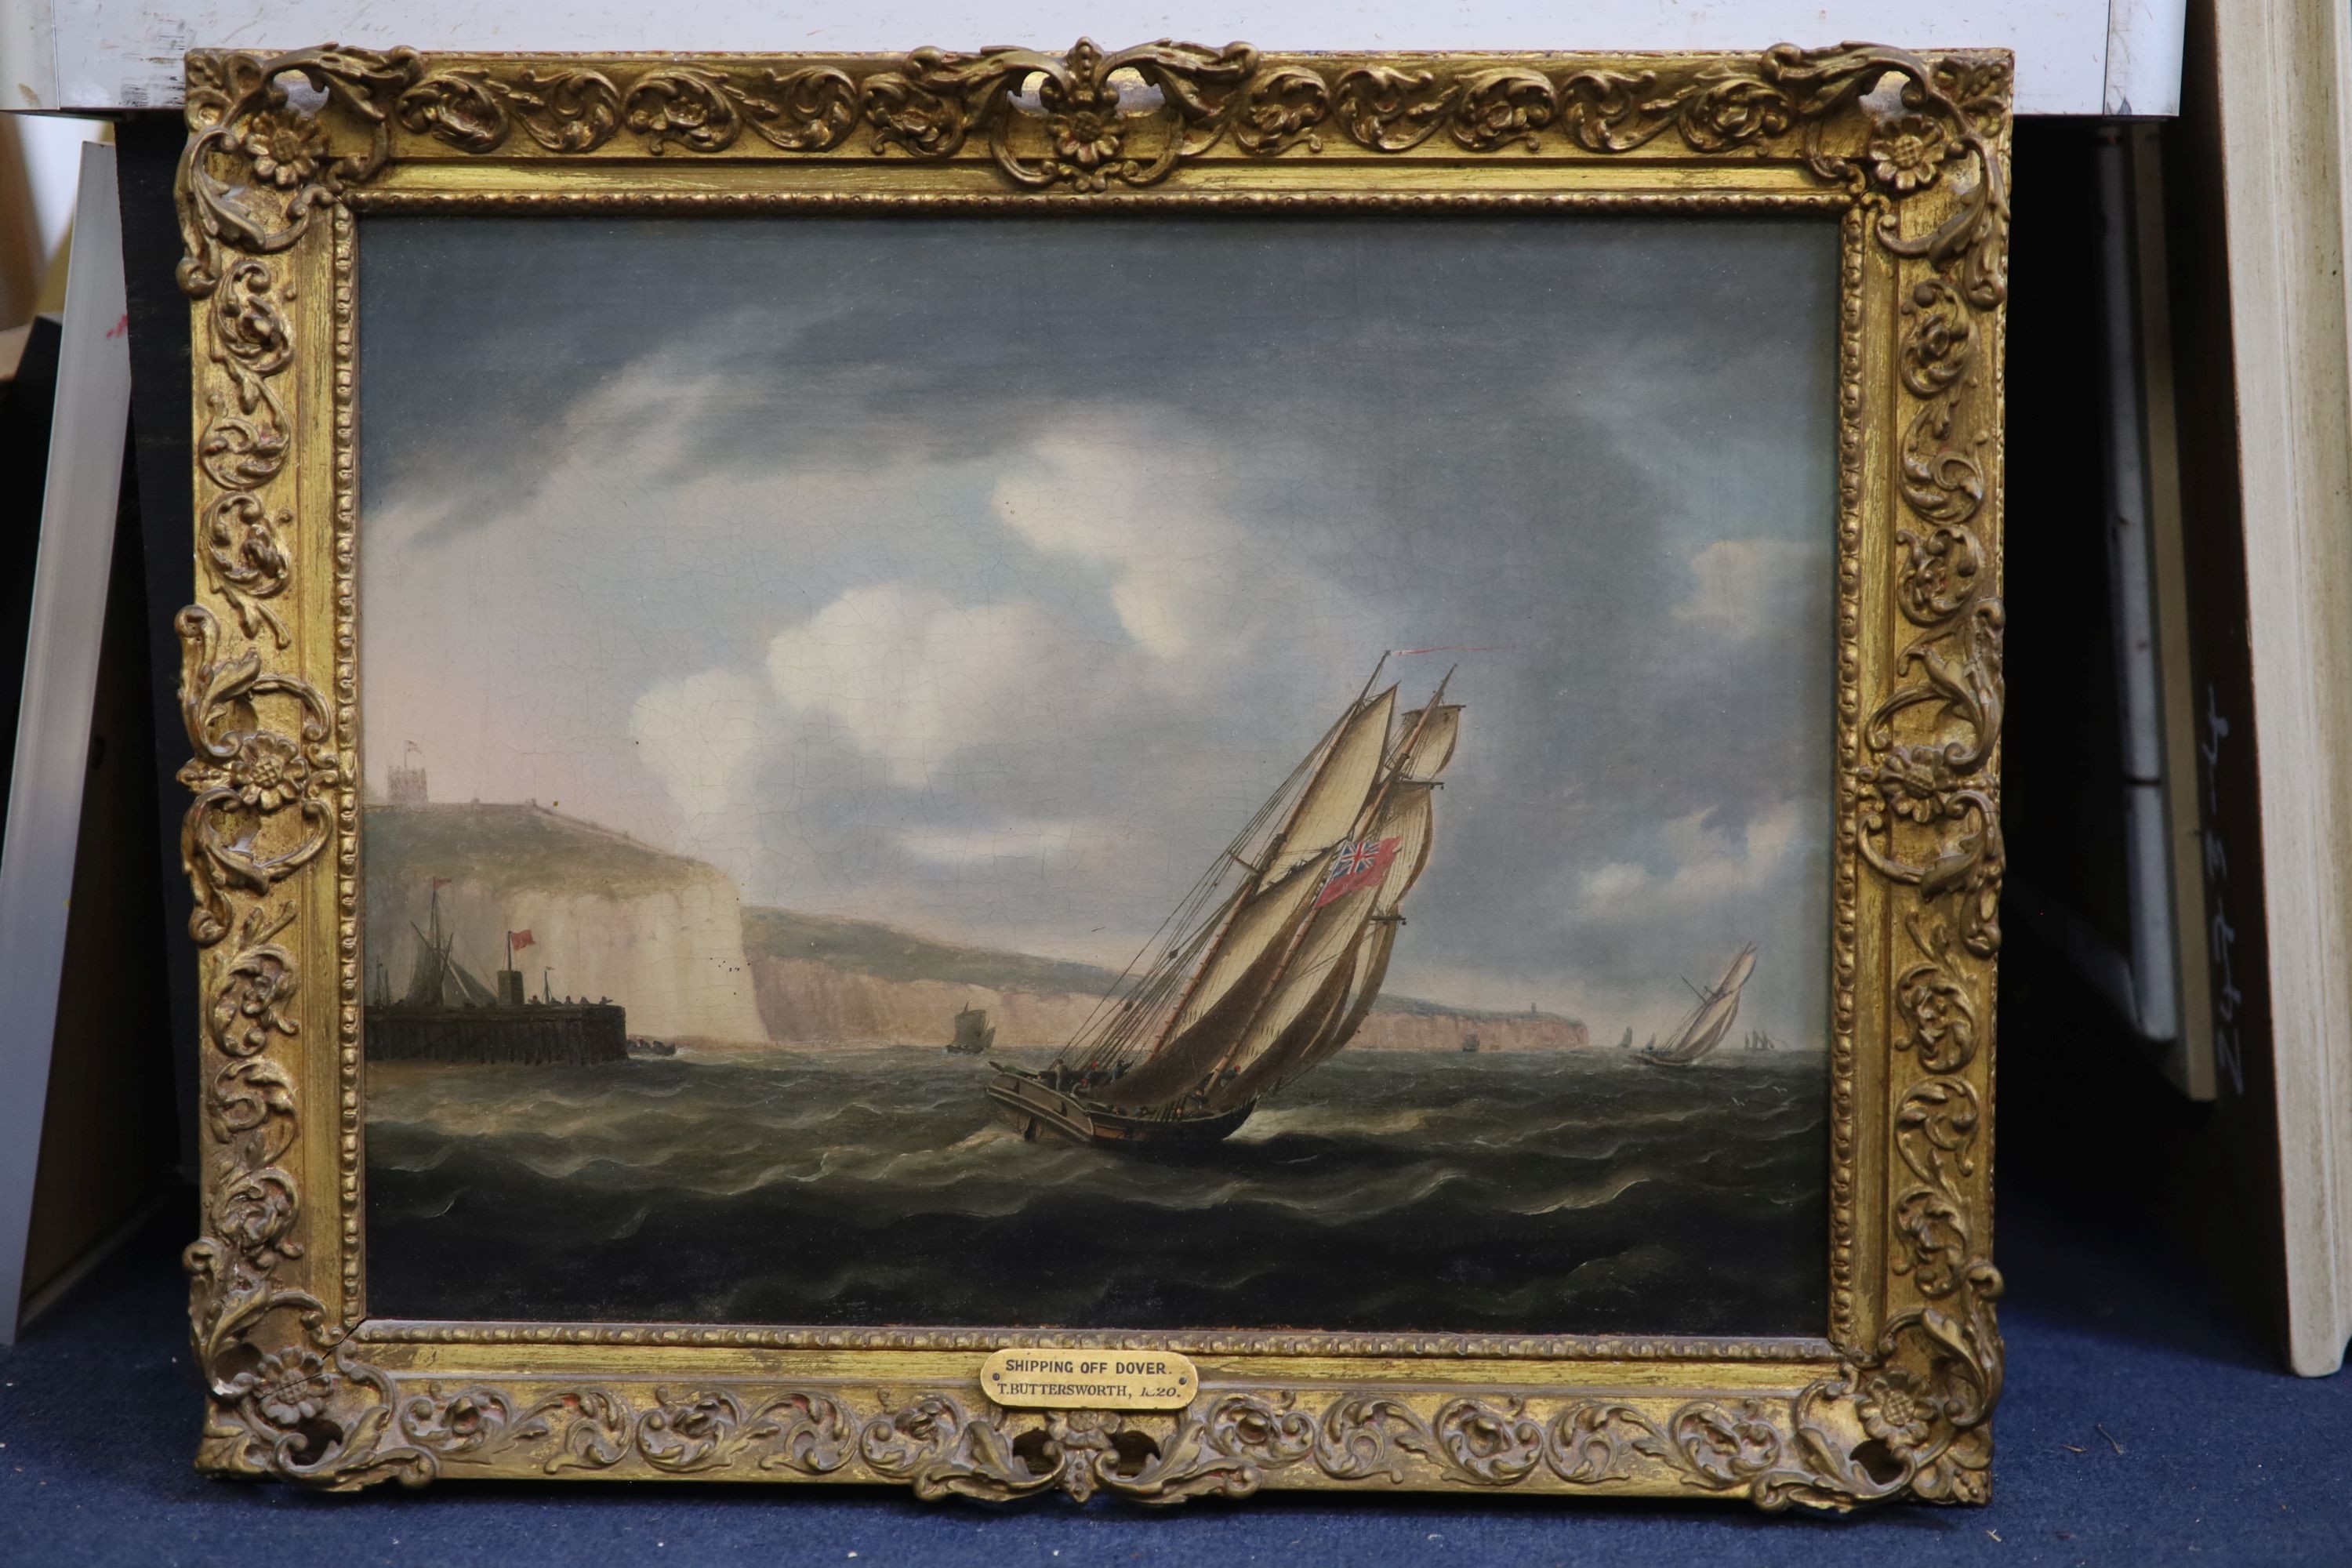 Thomas Buttersworth (1768-1842), Shipping off Dover, oil on canvas, 30 x 40cm